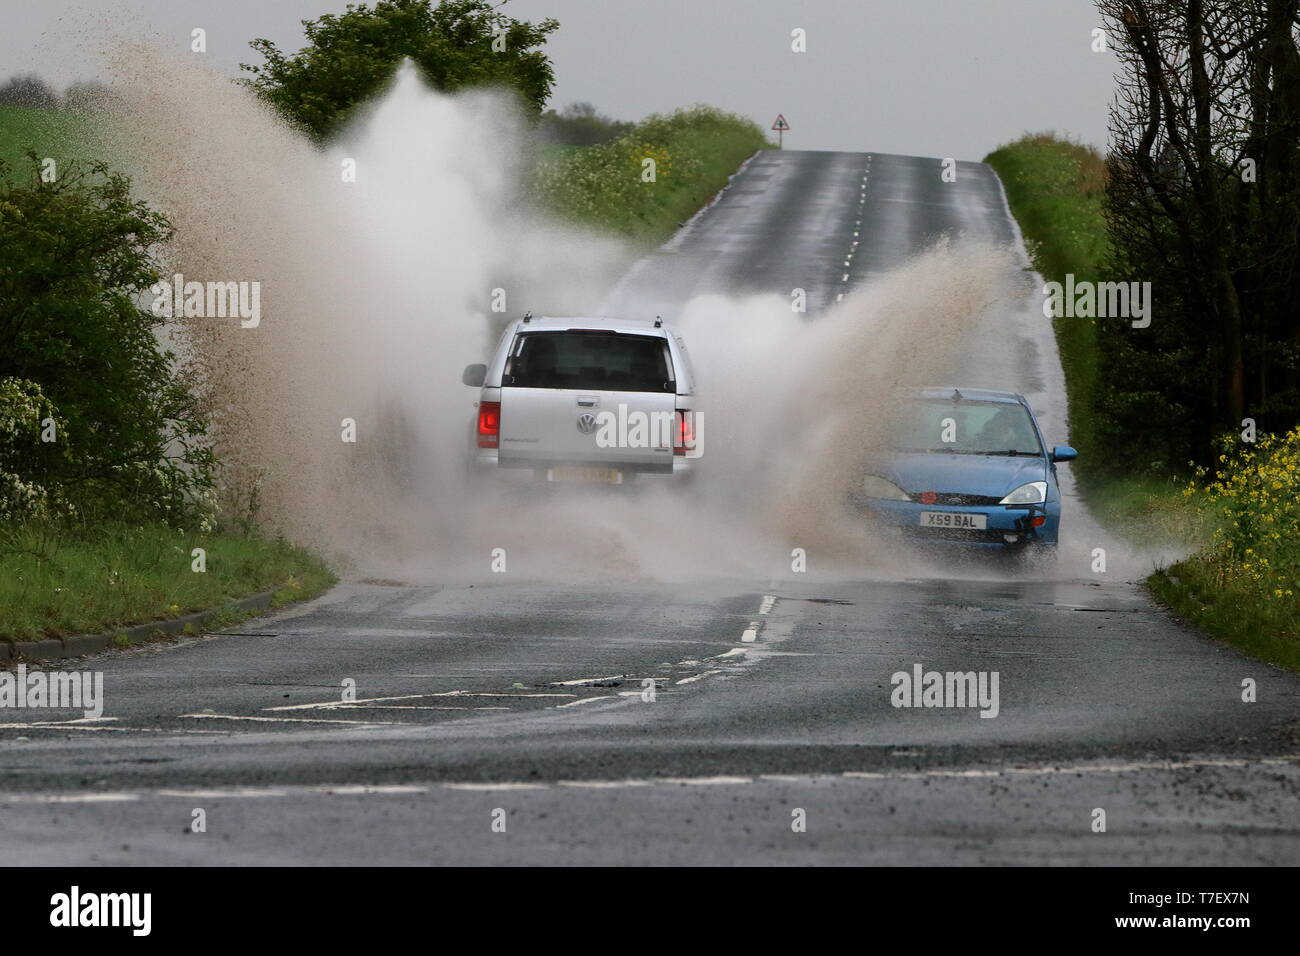 SUV splashing on coming car as it goes through a large puddle of standing water Stock Photo